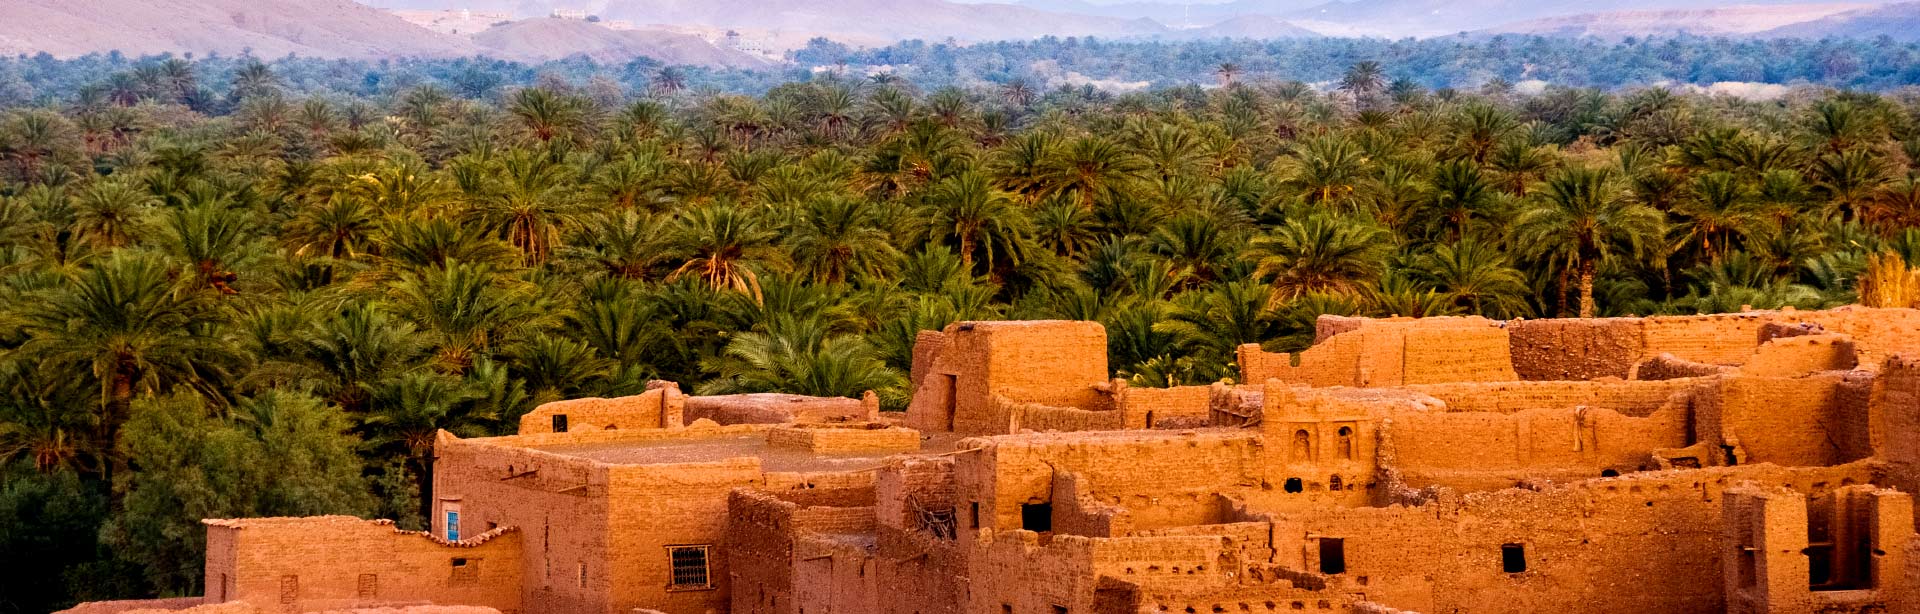 Most Popular Morocco Tour Packages